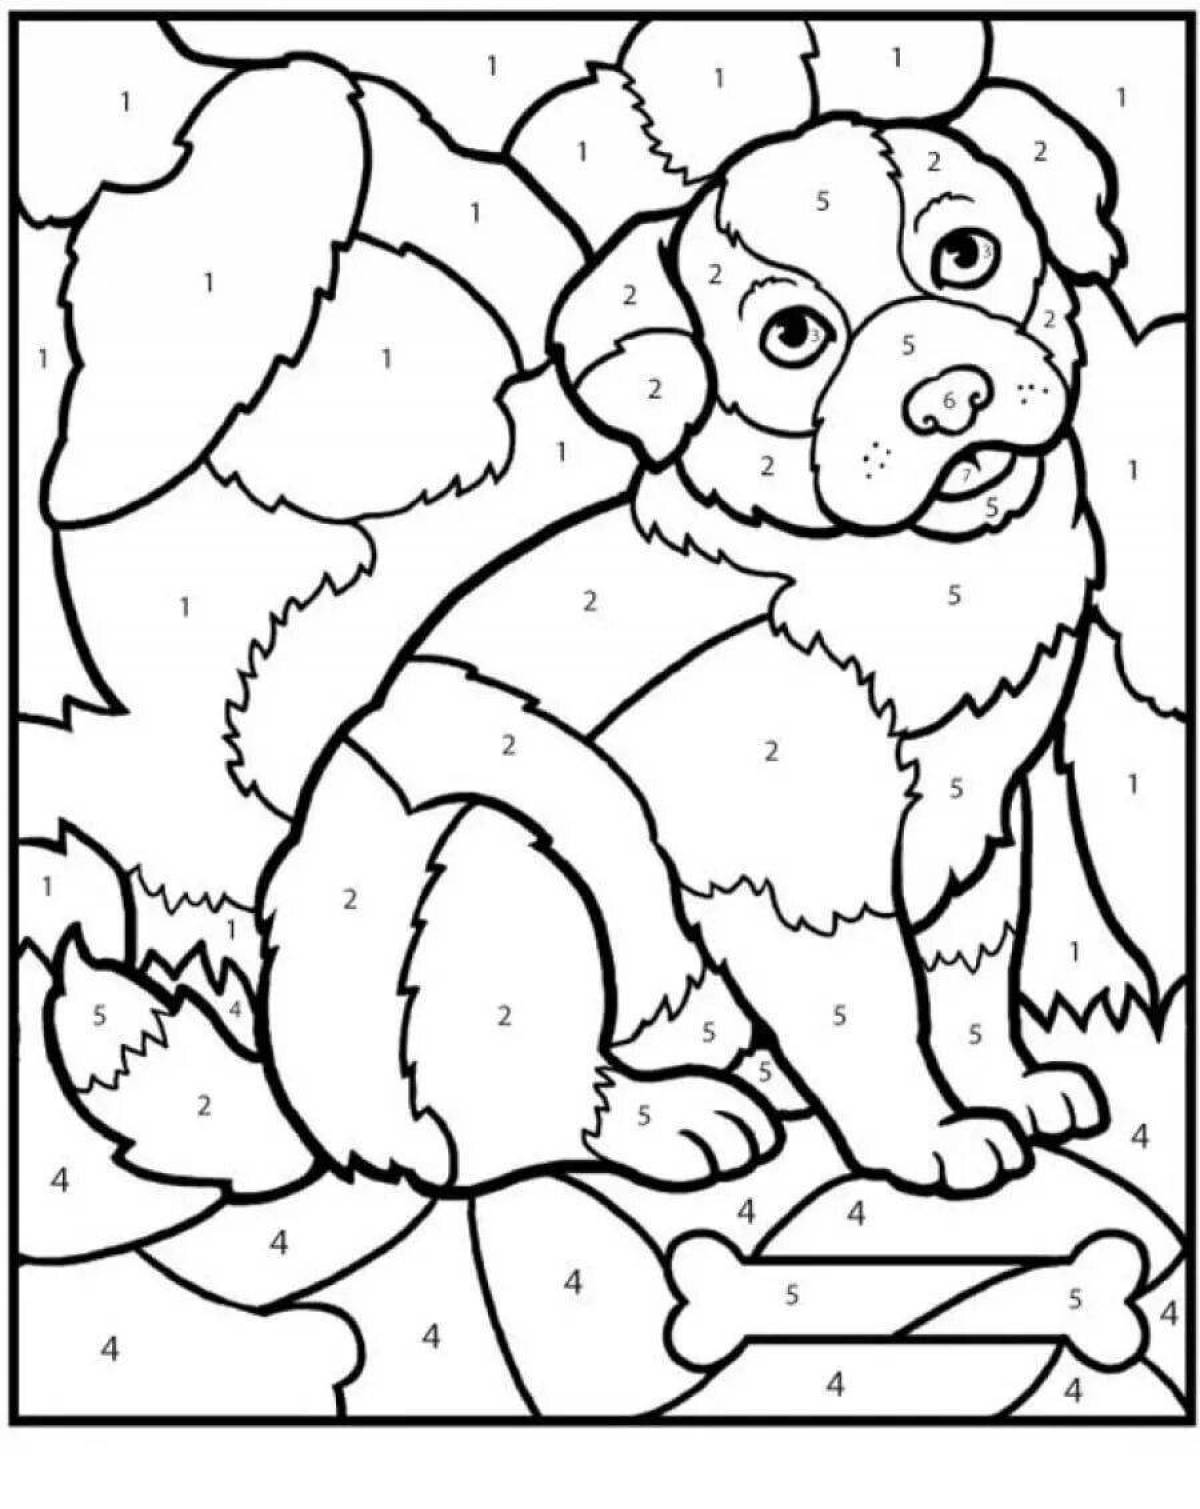 Fabulous pet coloring by numbers